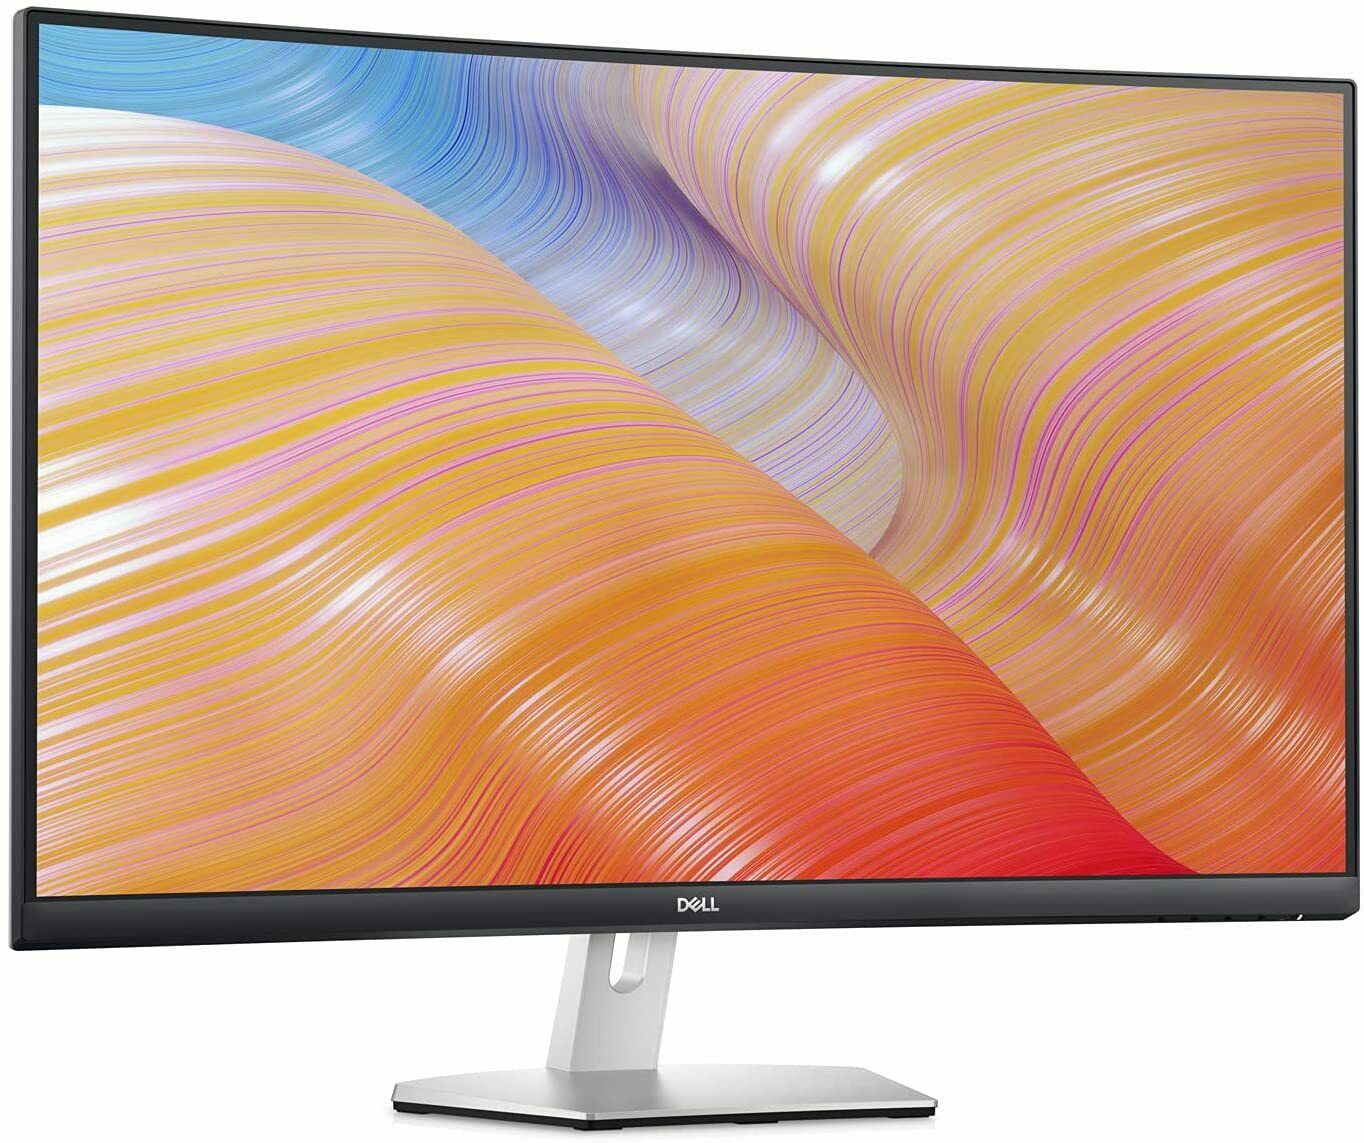 Dell S3222HN 32-inch FHD 1920 x 1080 at 75Hz Curved Monitor, 1800R Curvature,  8ms Grey-to-Grey Response Time (Normal Mode), 16.7 Million Colors, Black  (Latest Model)